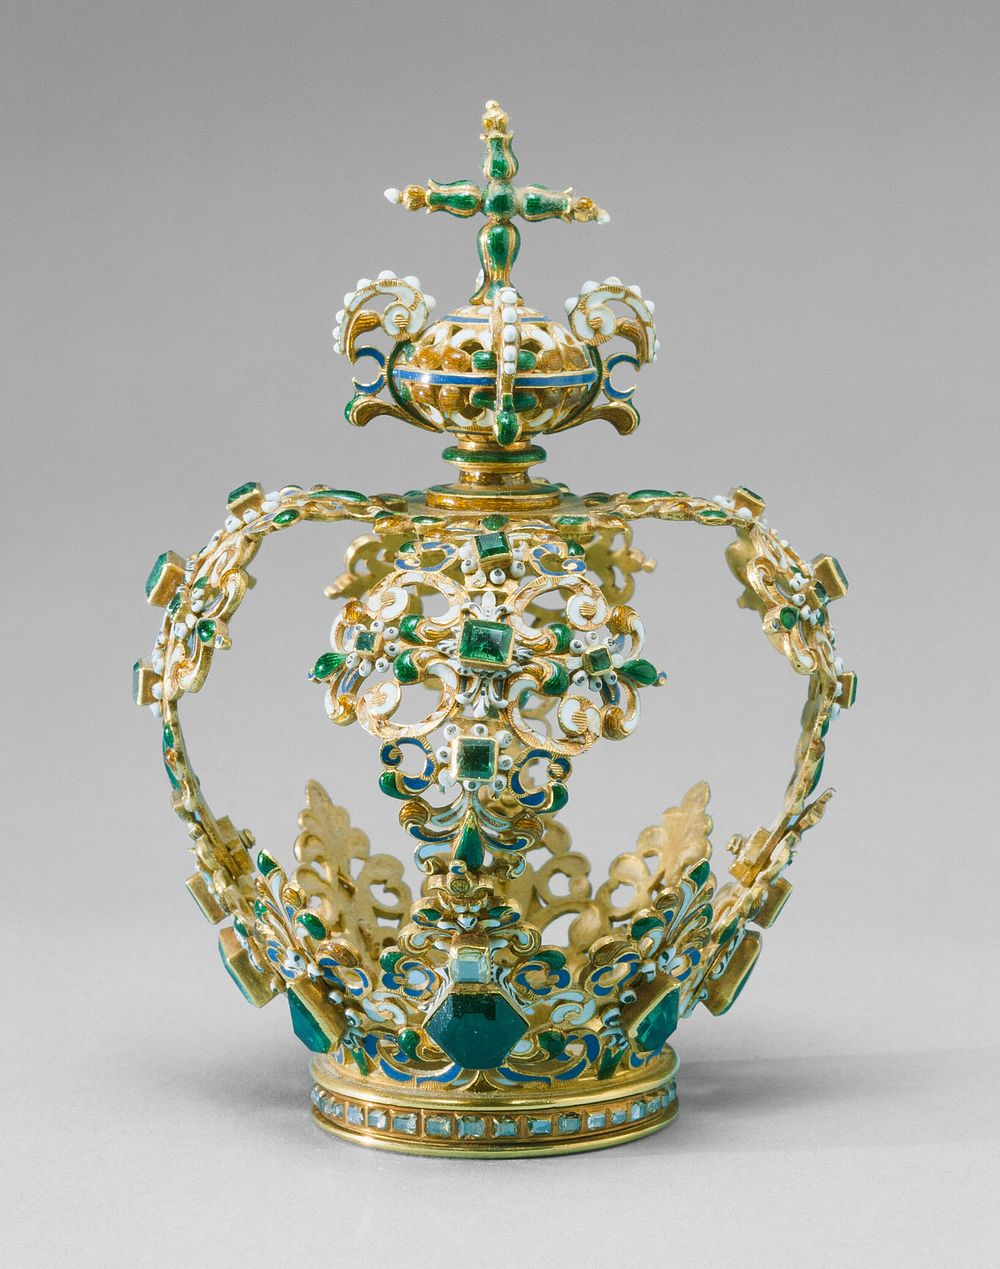 Crown, Probably for a Statue of the Christ Child